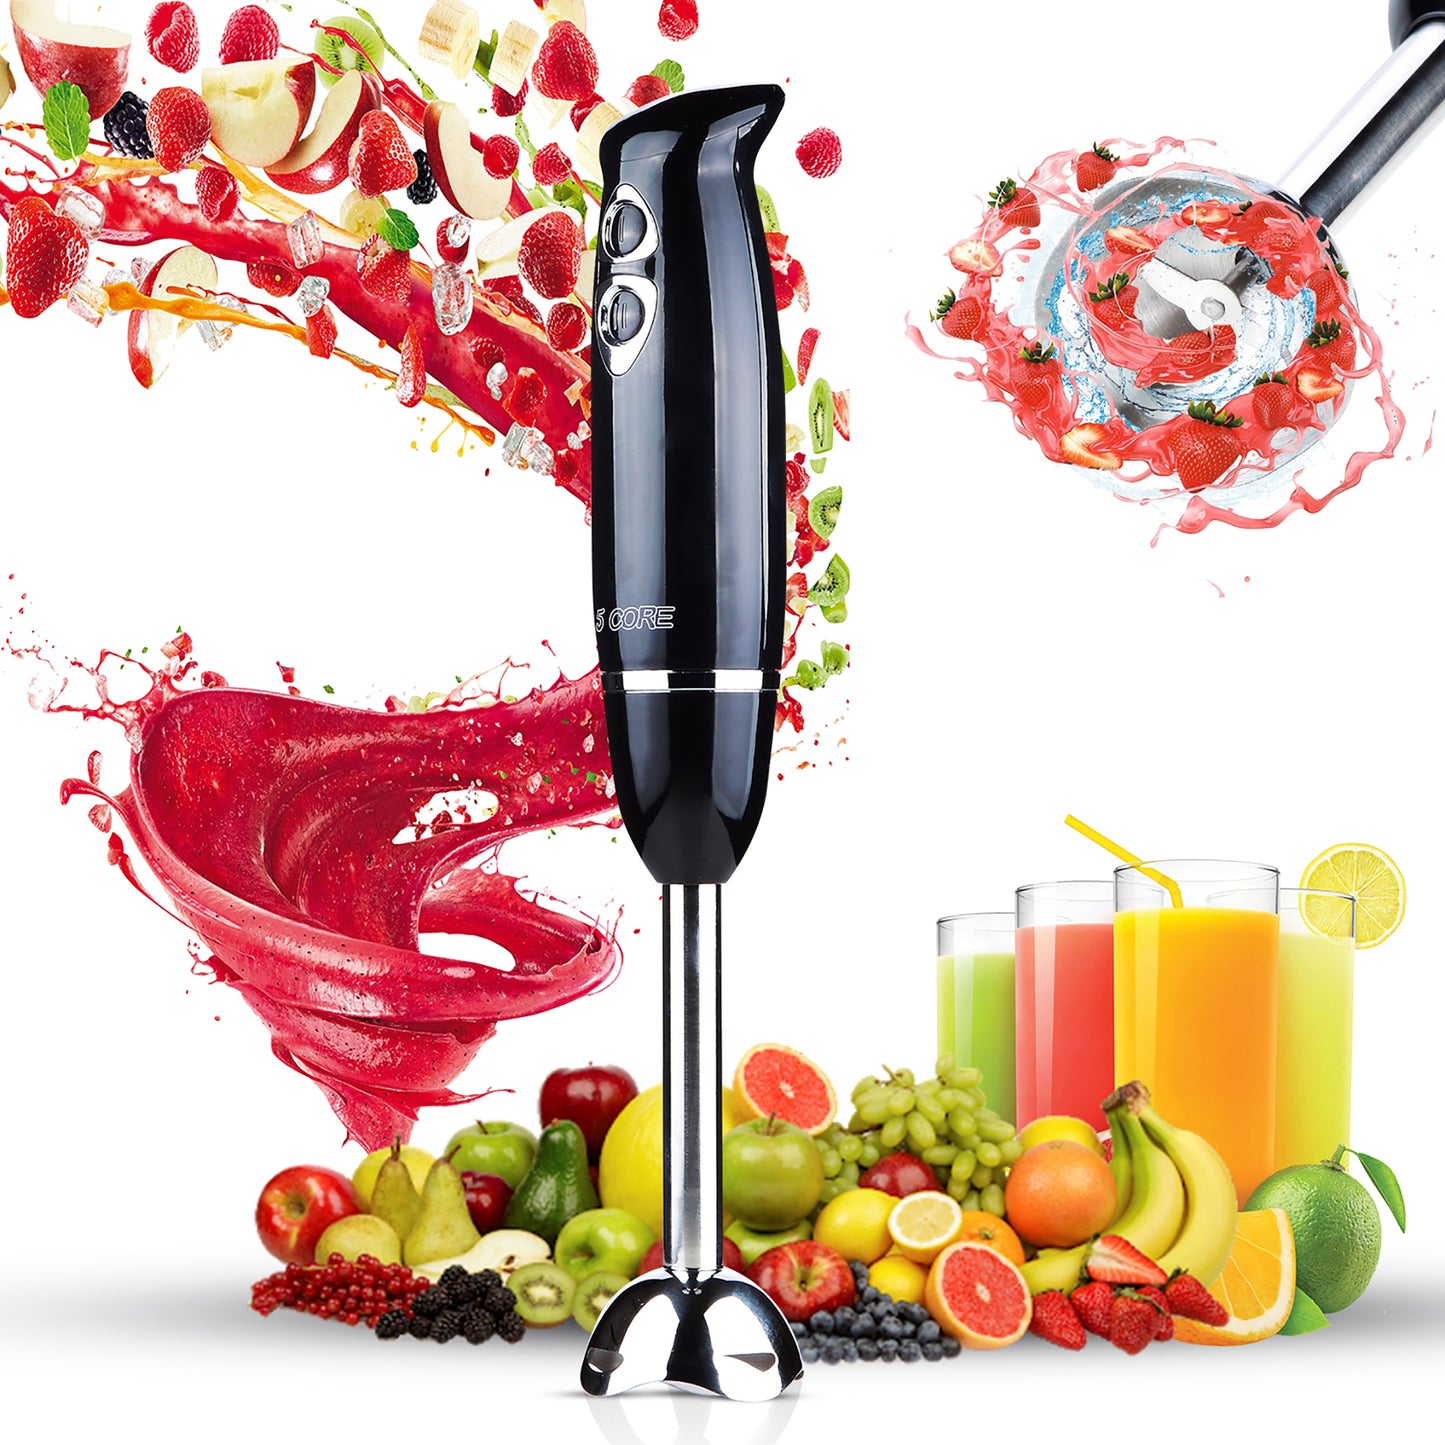 5 Core Powerful Immersion Blender Black| 500 Watt Multi-Purpose Hand Blender Heavy Duty Copper Motor w/ Steel Finish | For Soup, Smoothie, Puree, Baby Food, 304 Stainless Steel Blades- HB 1510 BLK